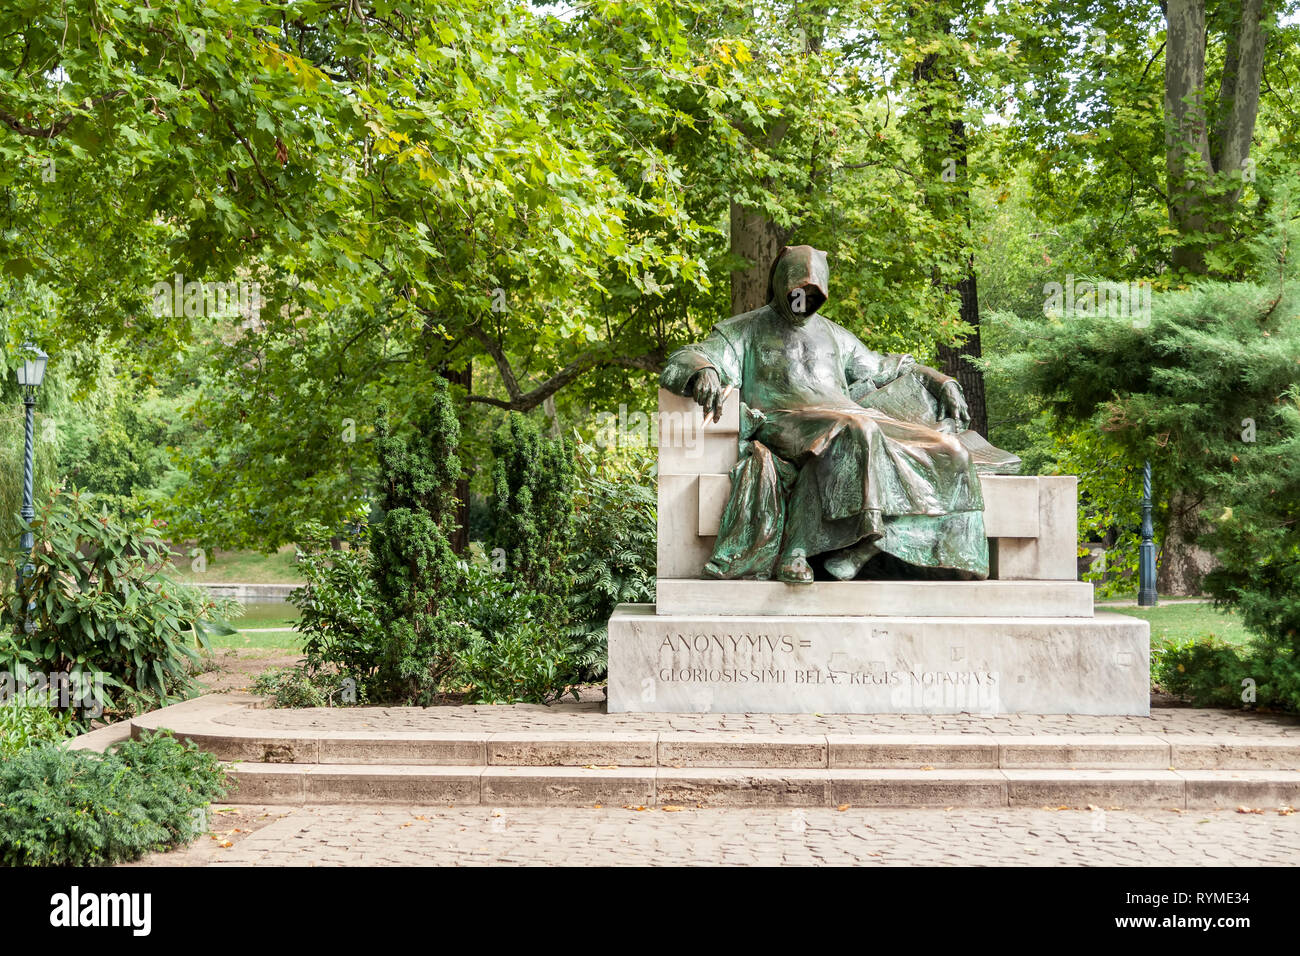 Monument to an anonymus in park Varosliget, Budapest Stock Photo